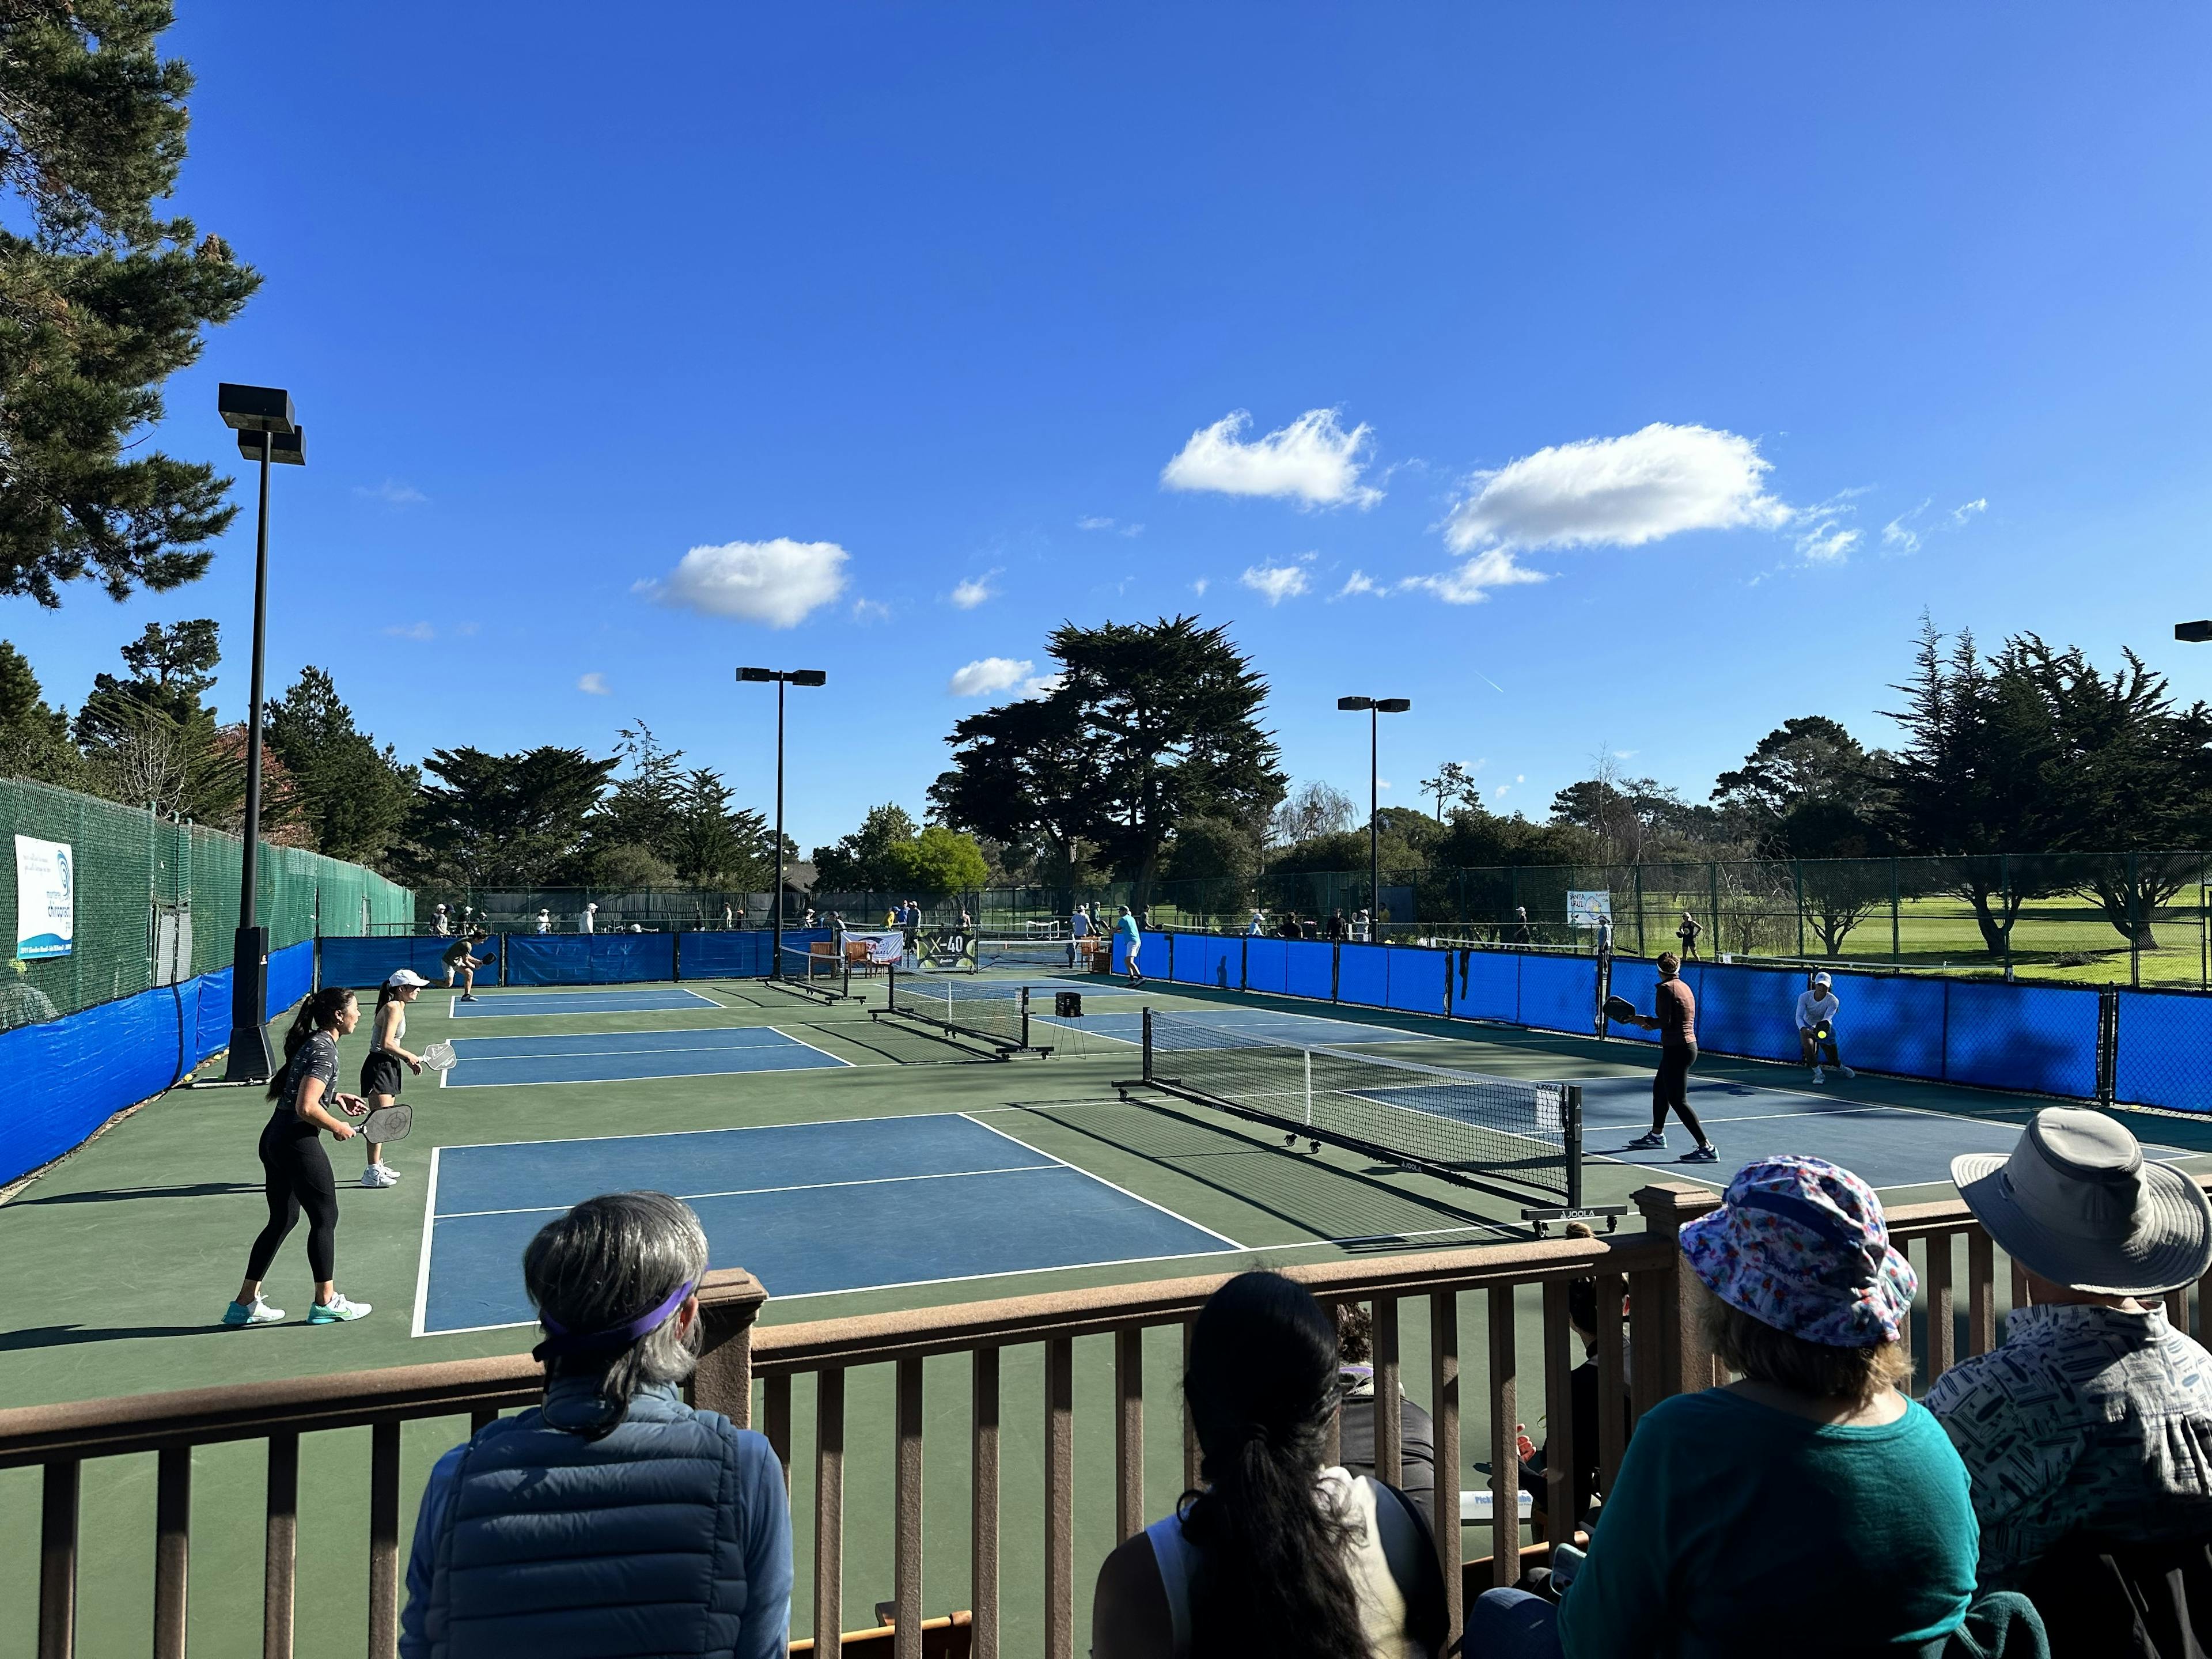 Image 3 of 9 of Monterey Bay Racquet Club court